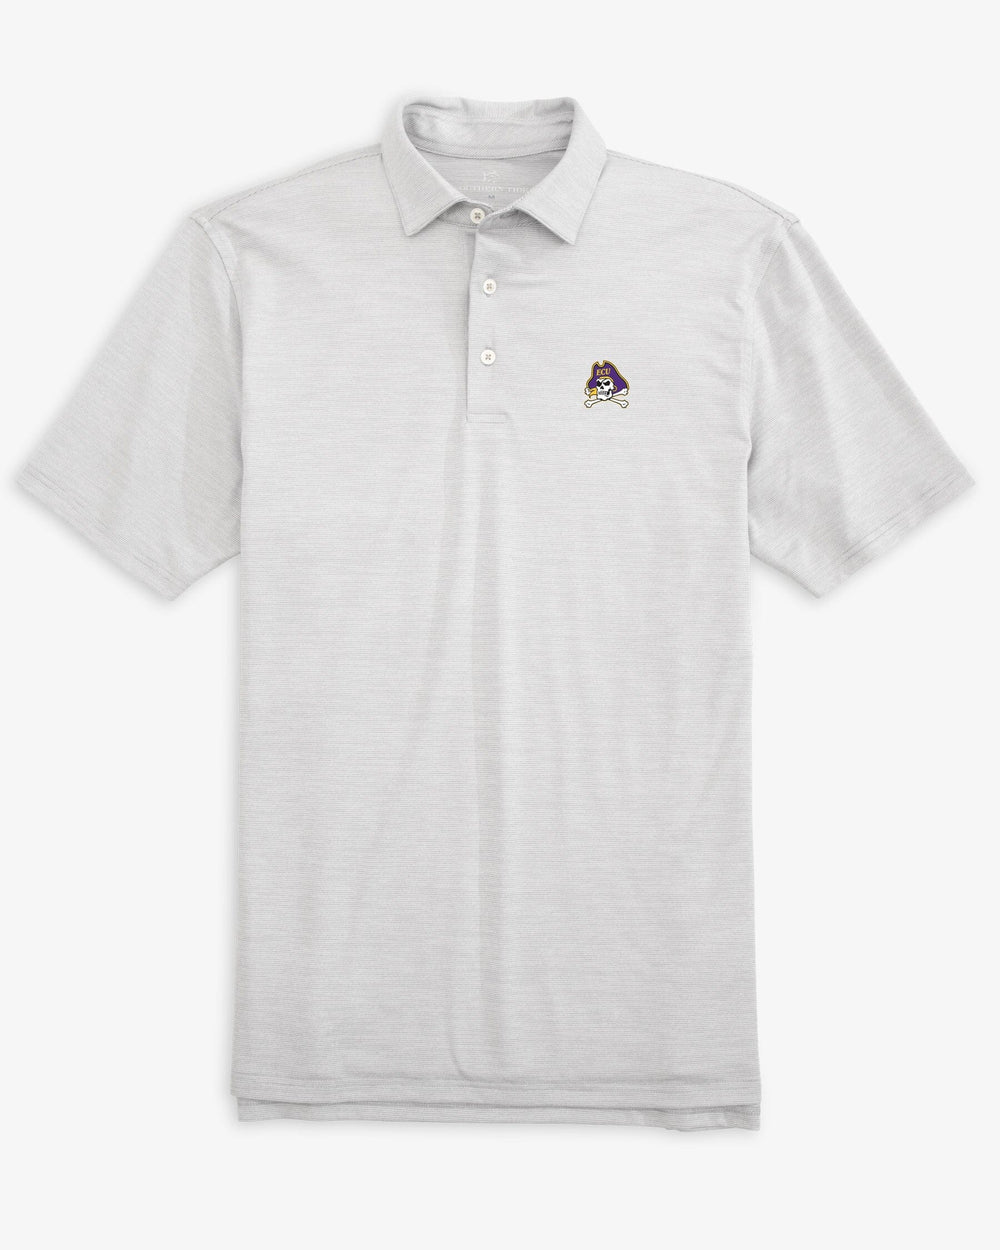 The front of the Men's East Carolina Driver Spacedye Polo Shirt by Southern Tide - Slate Grey